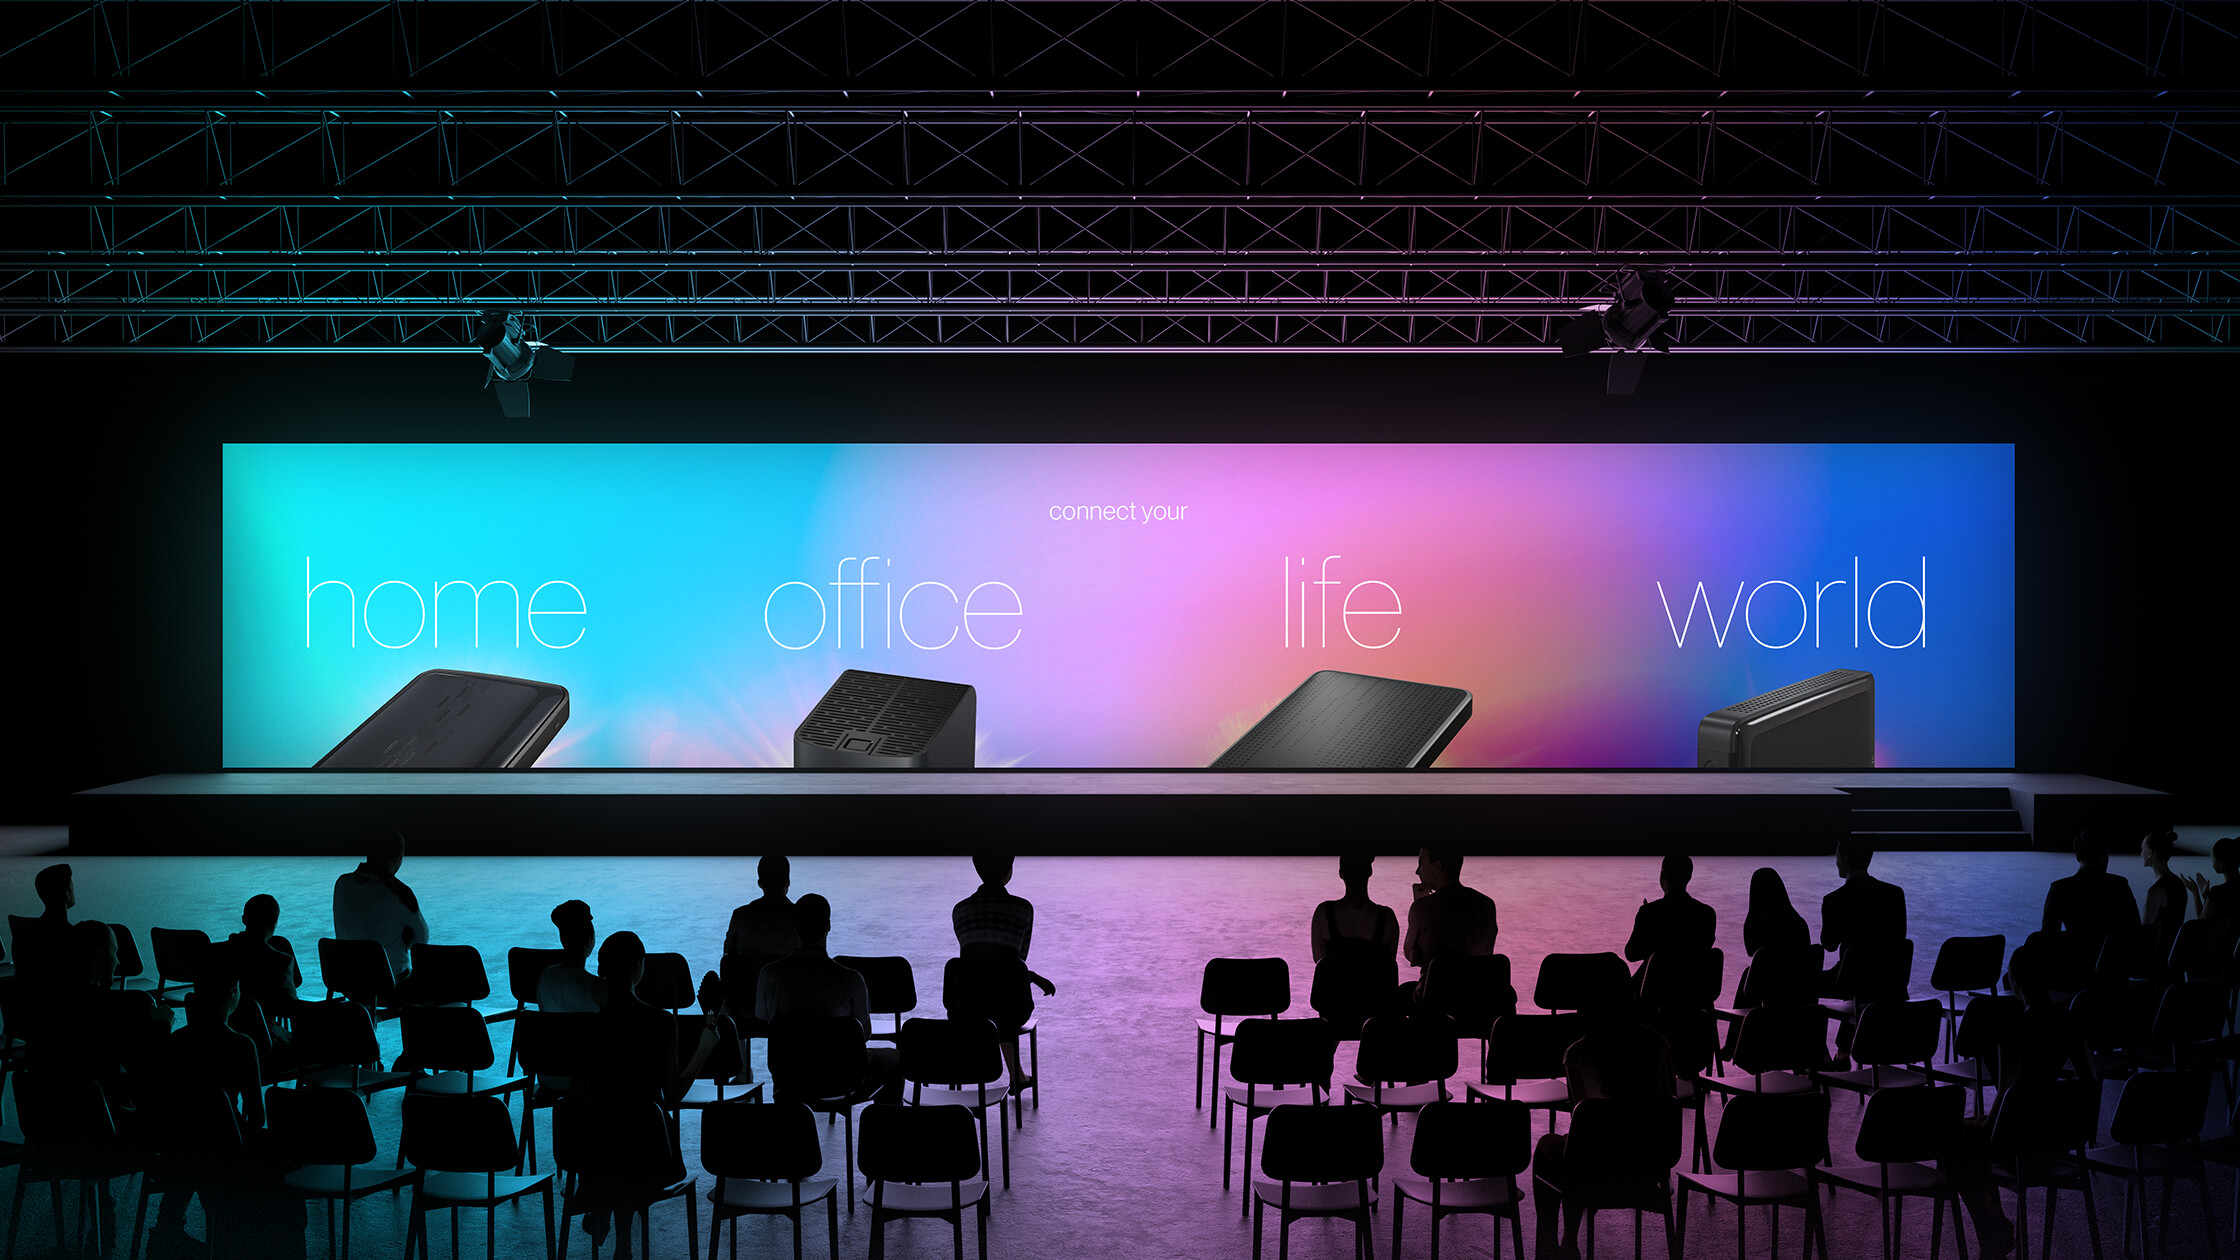 Colorful keynote presentation design for Western Digital category of products